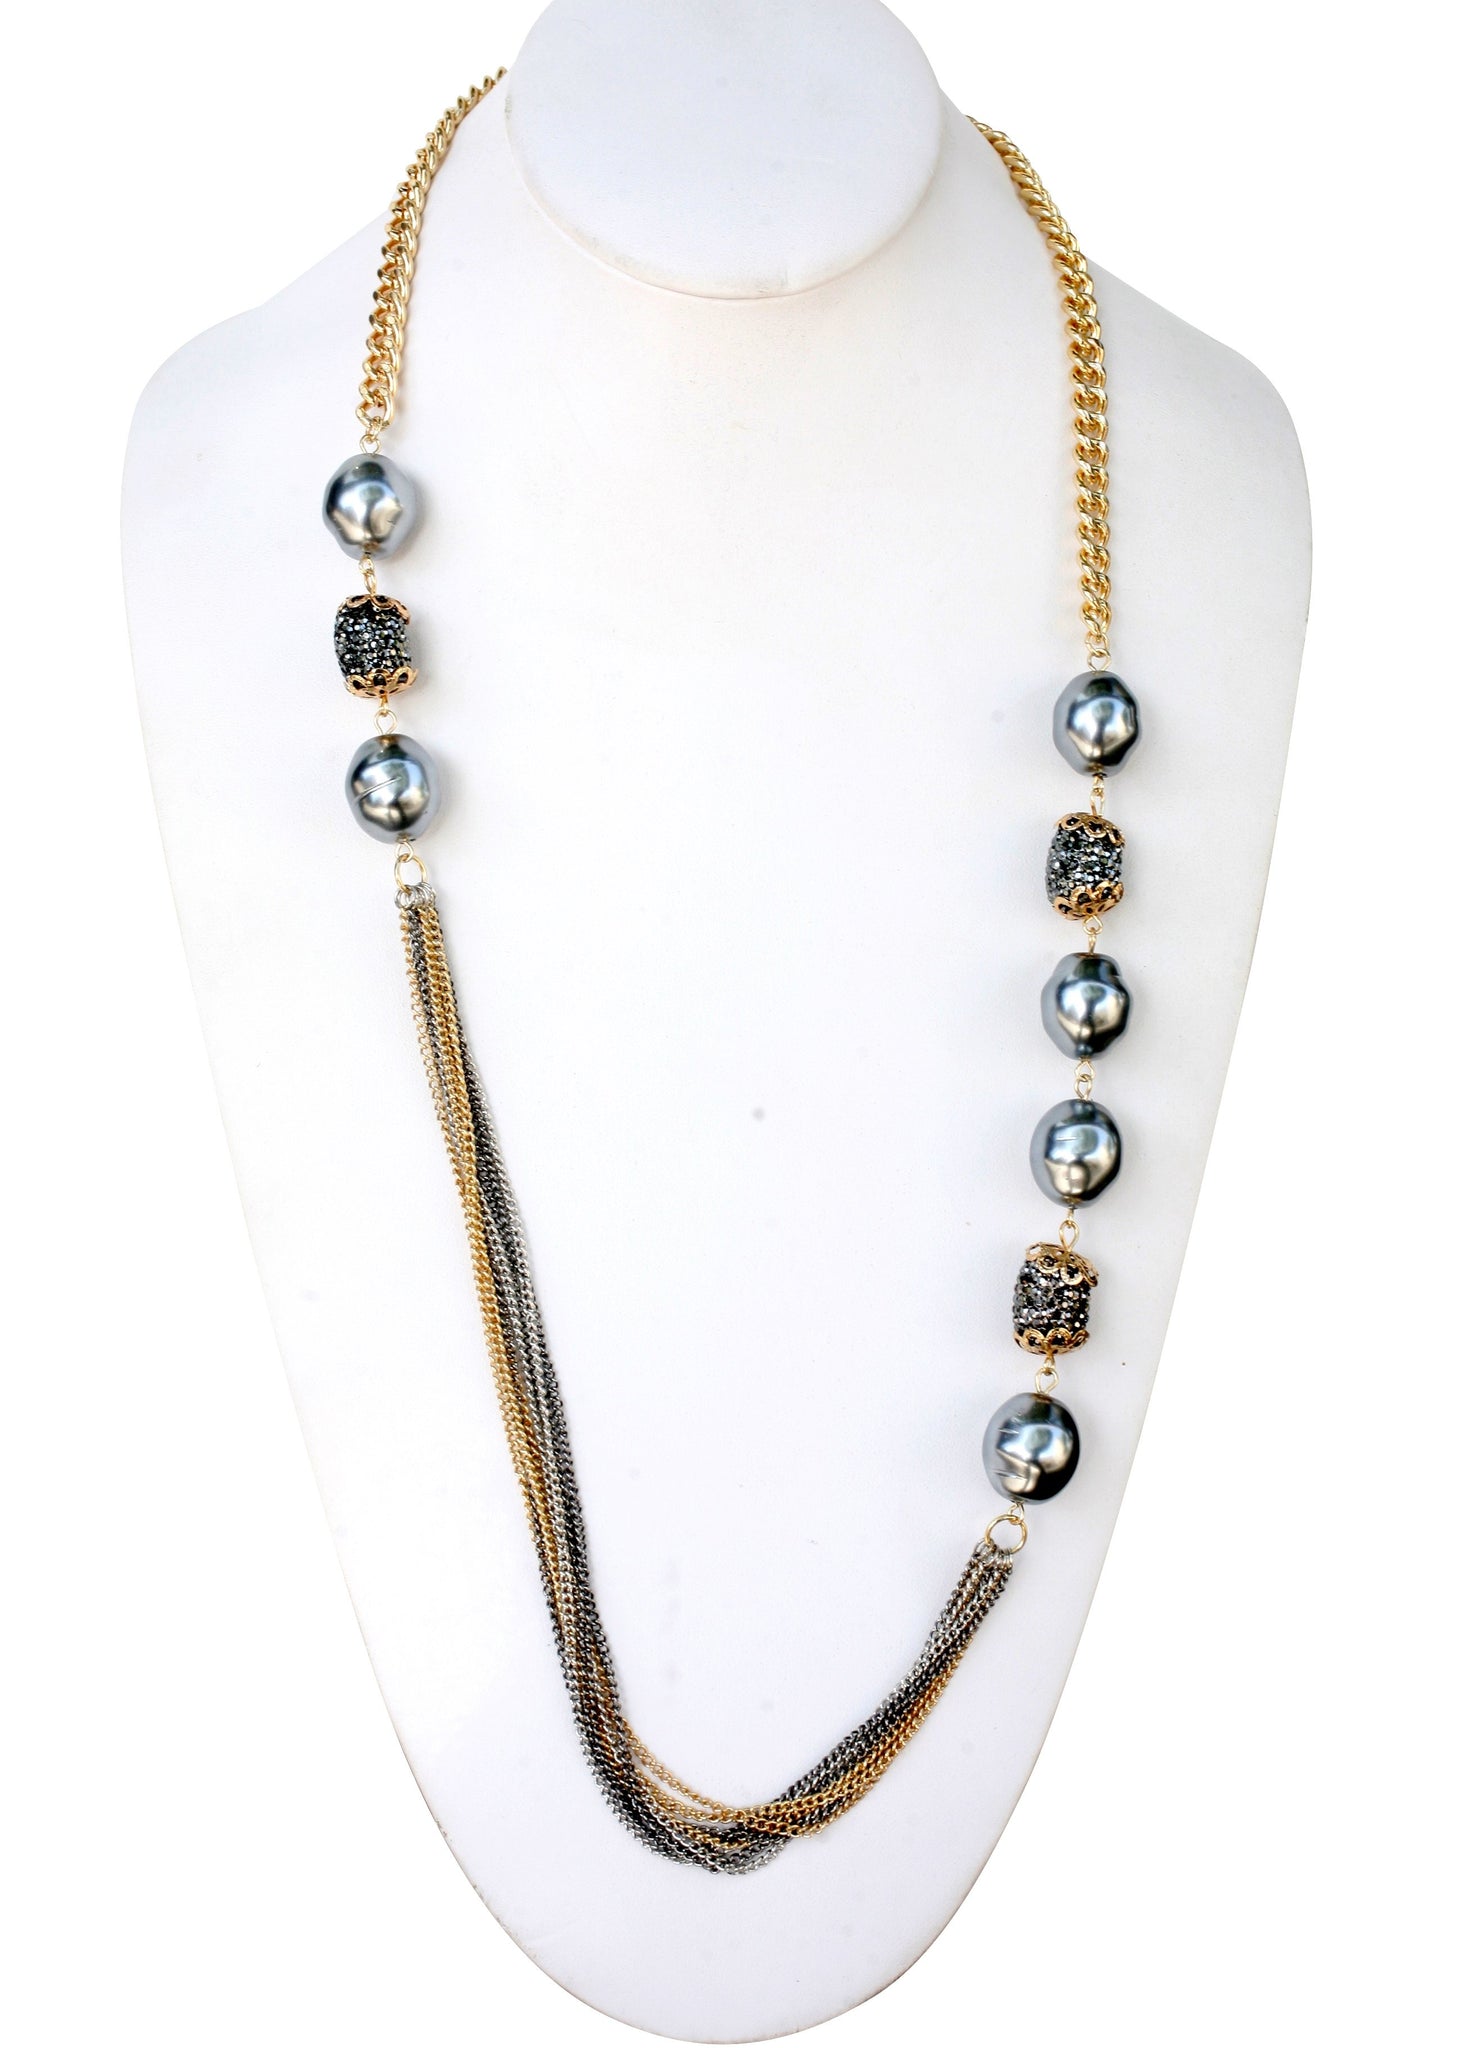 Three tone multi strand 36" chain necklace with oval pearls and barrel fireball crystal embellished stations 661N-994